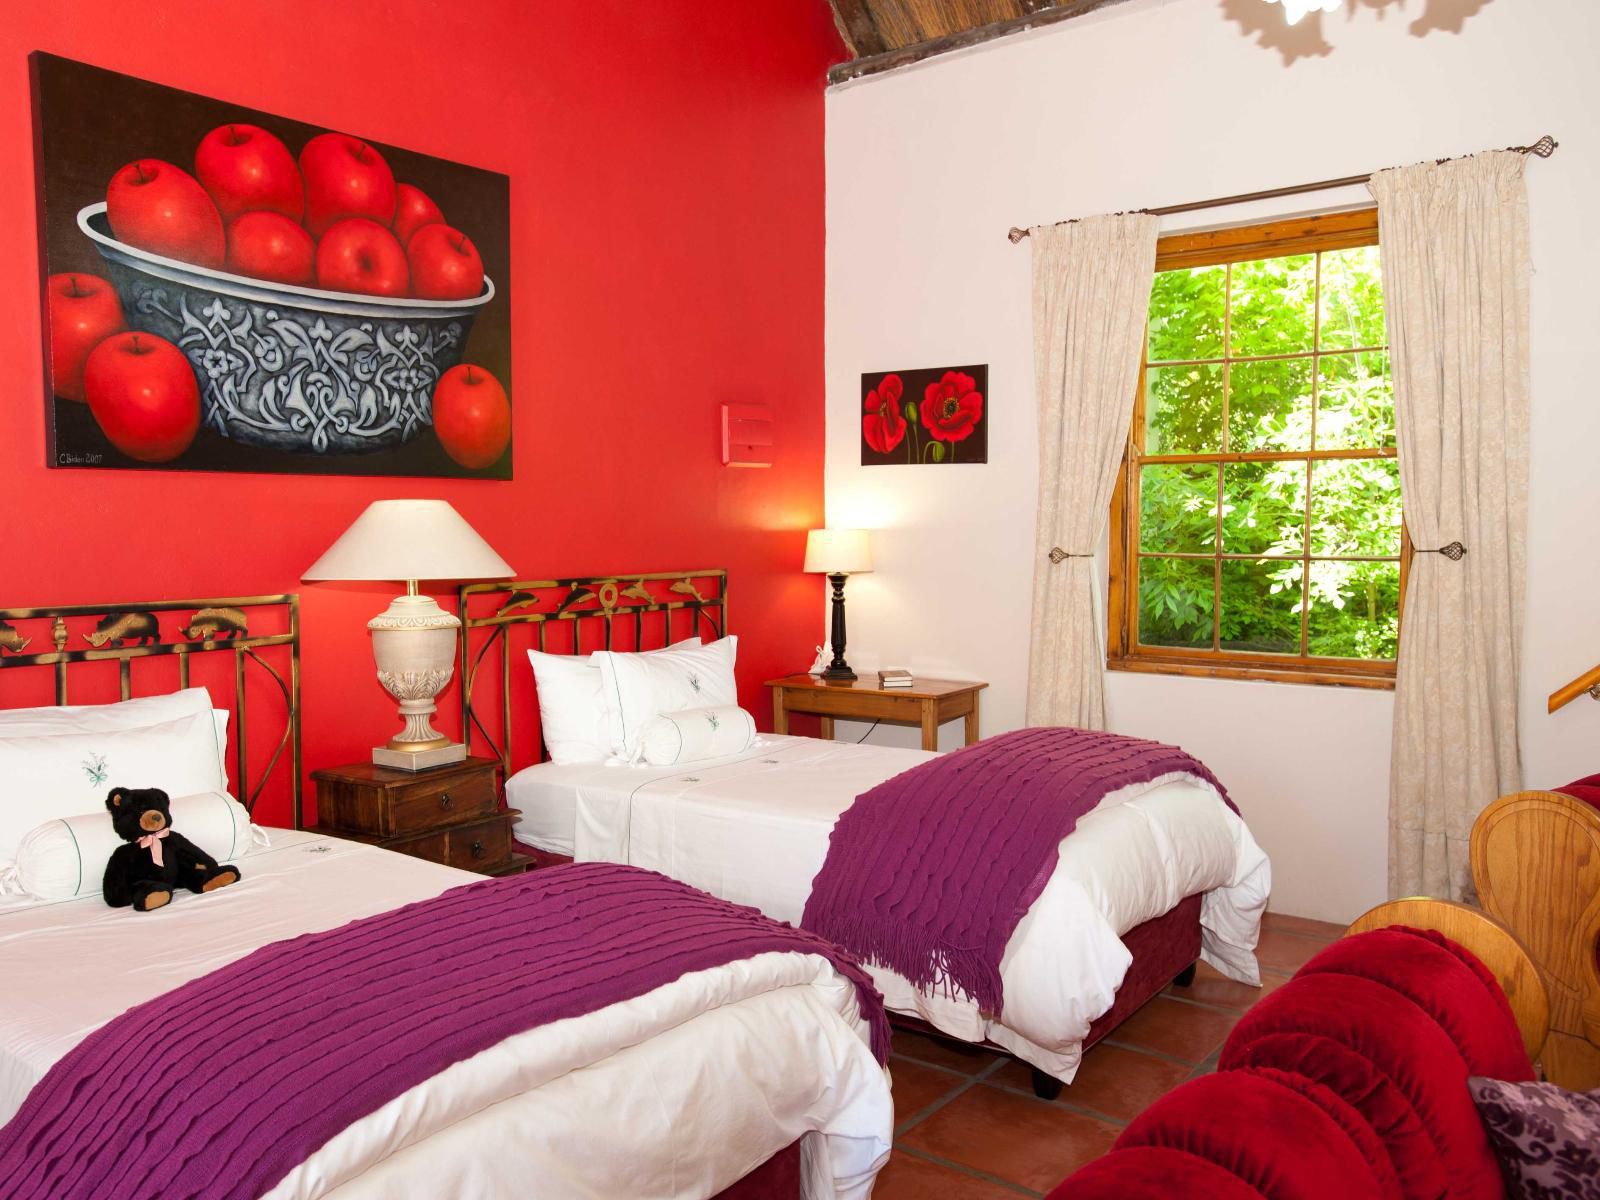 7 Church Street Guest House Montagu Western Cape South Africa Colorful, Bedroom